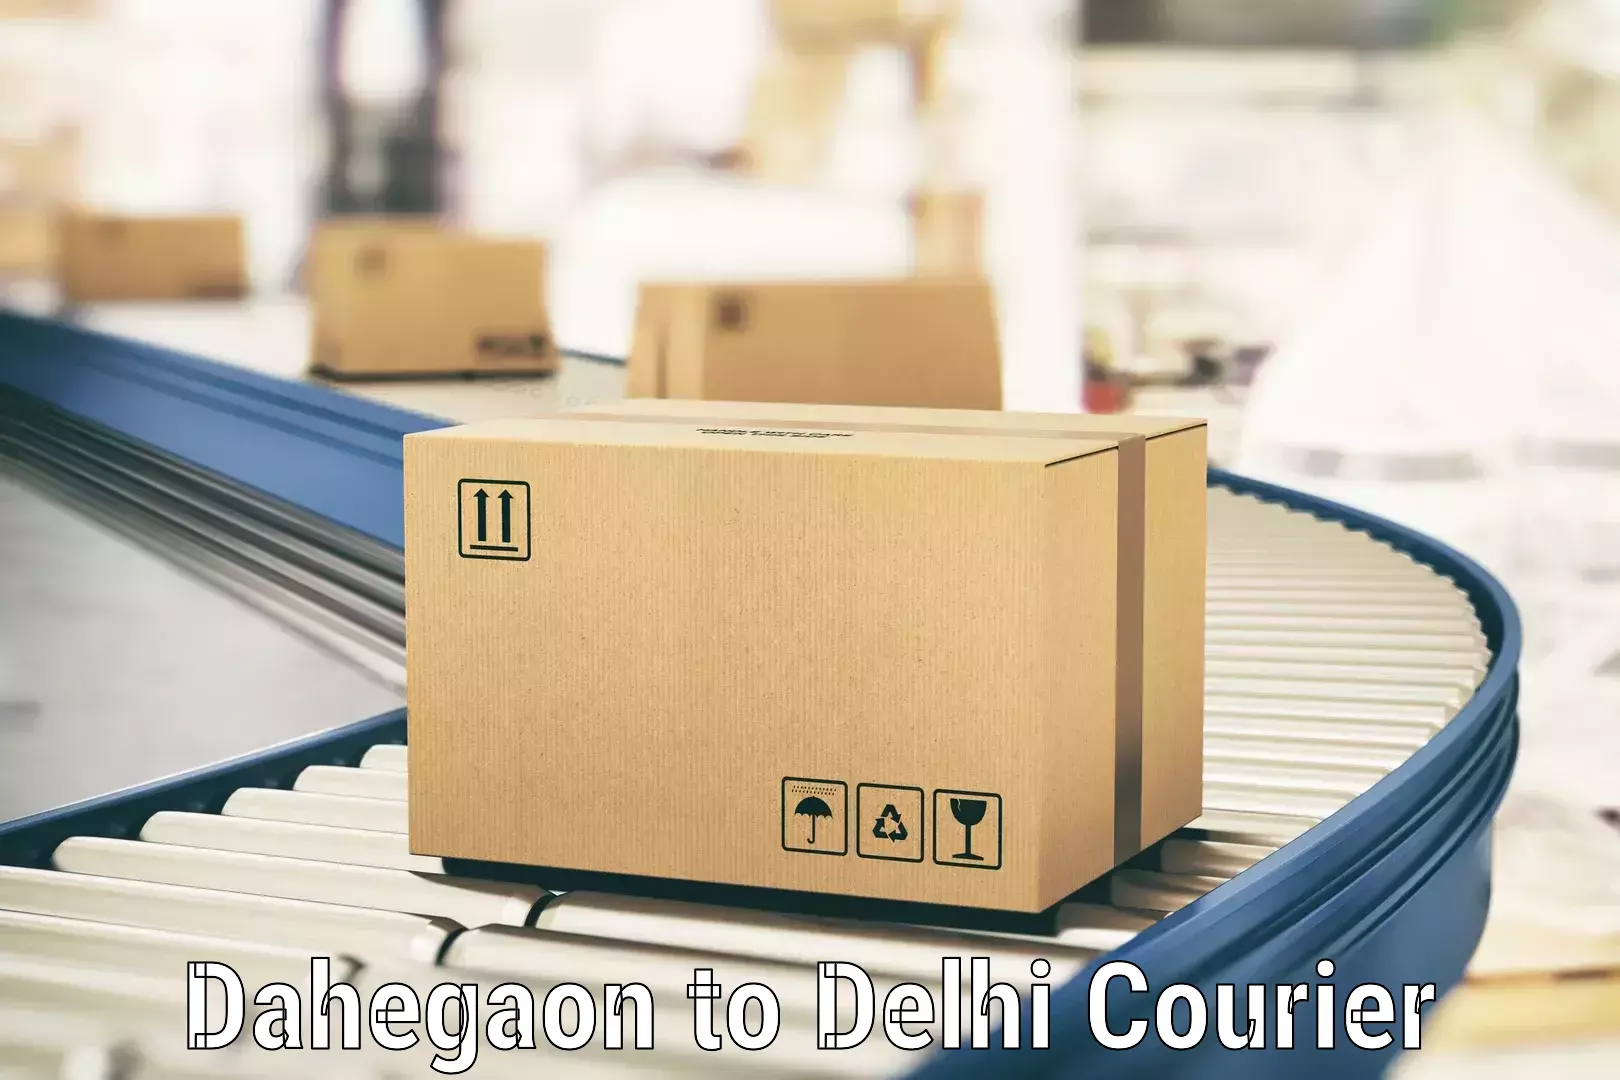 Courier service innovation Dahegaon to NCR